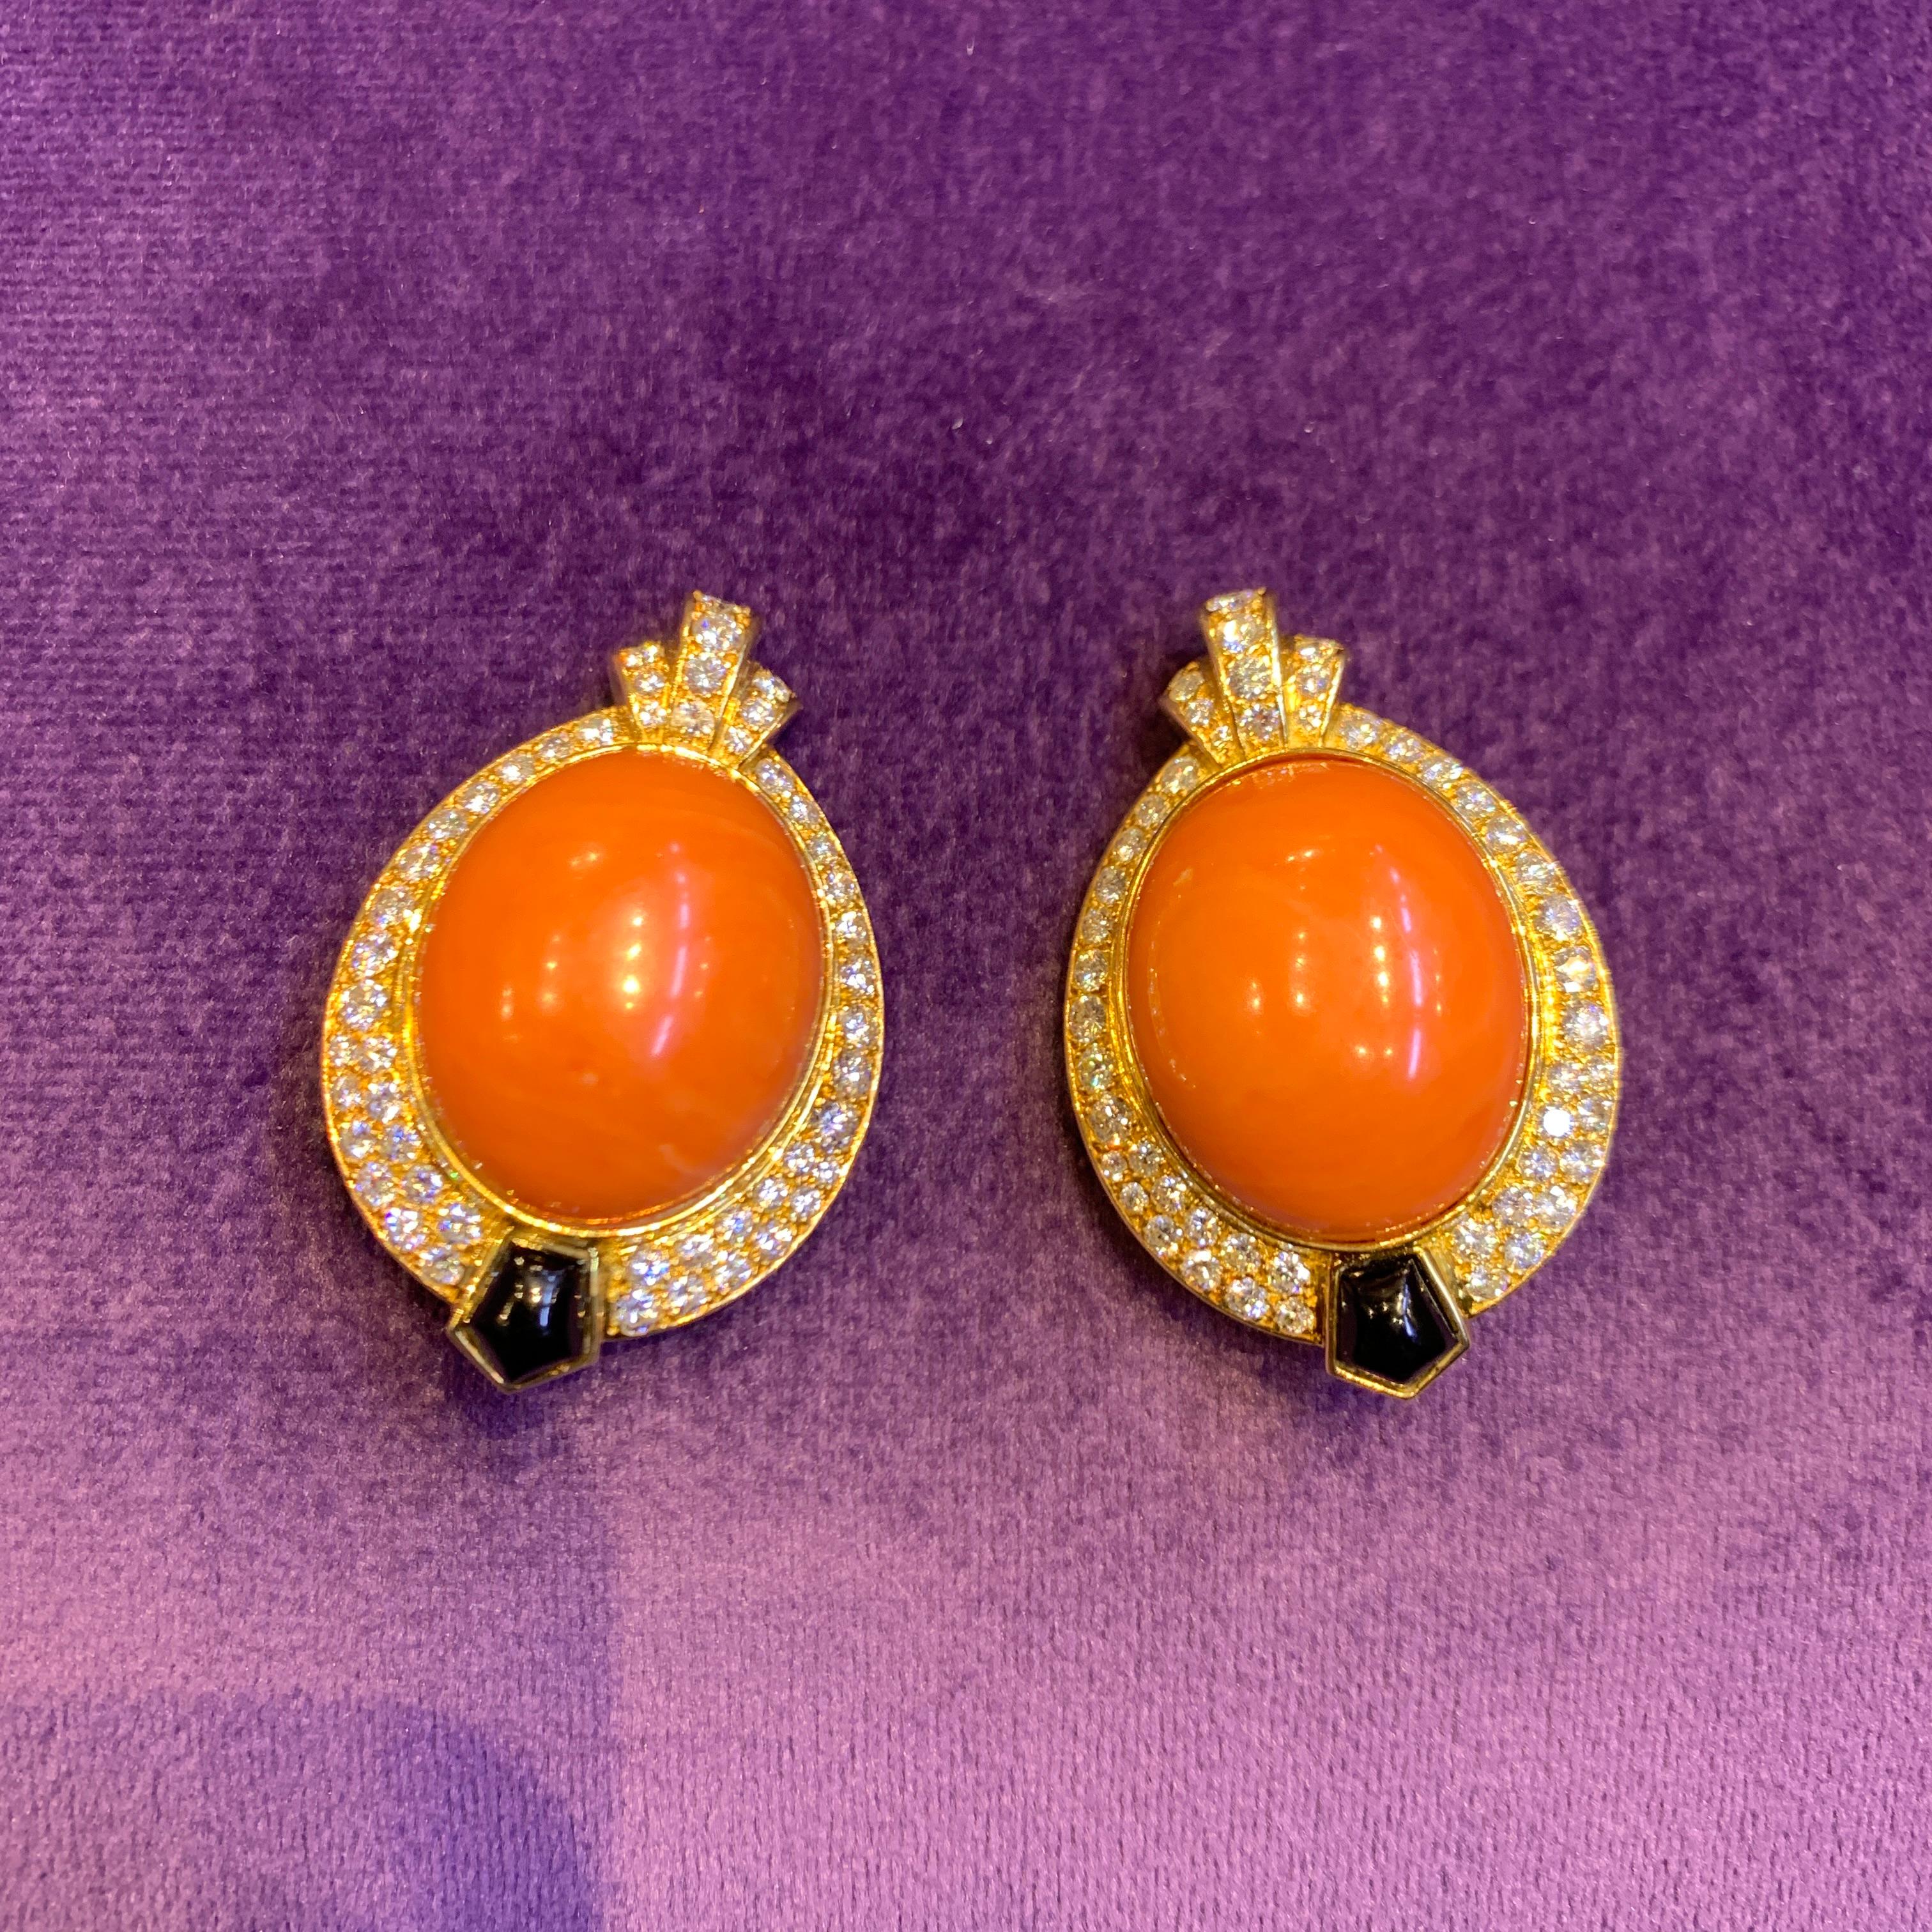 Cartier Egyptian Revival Coral Diamond & Onyx Earrings For Sale 3